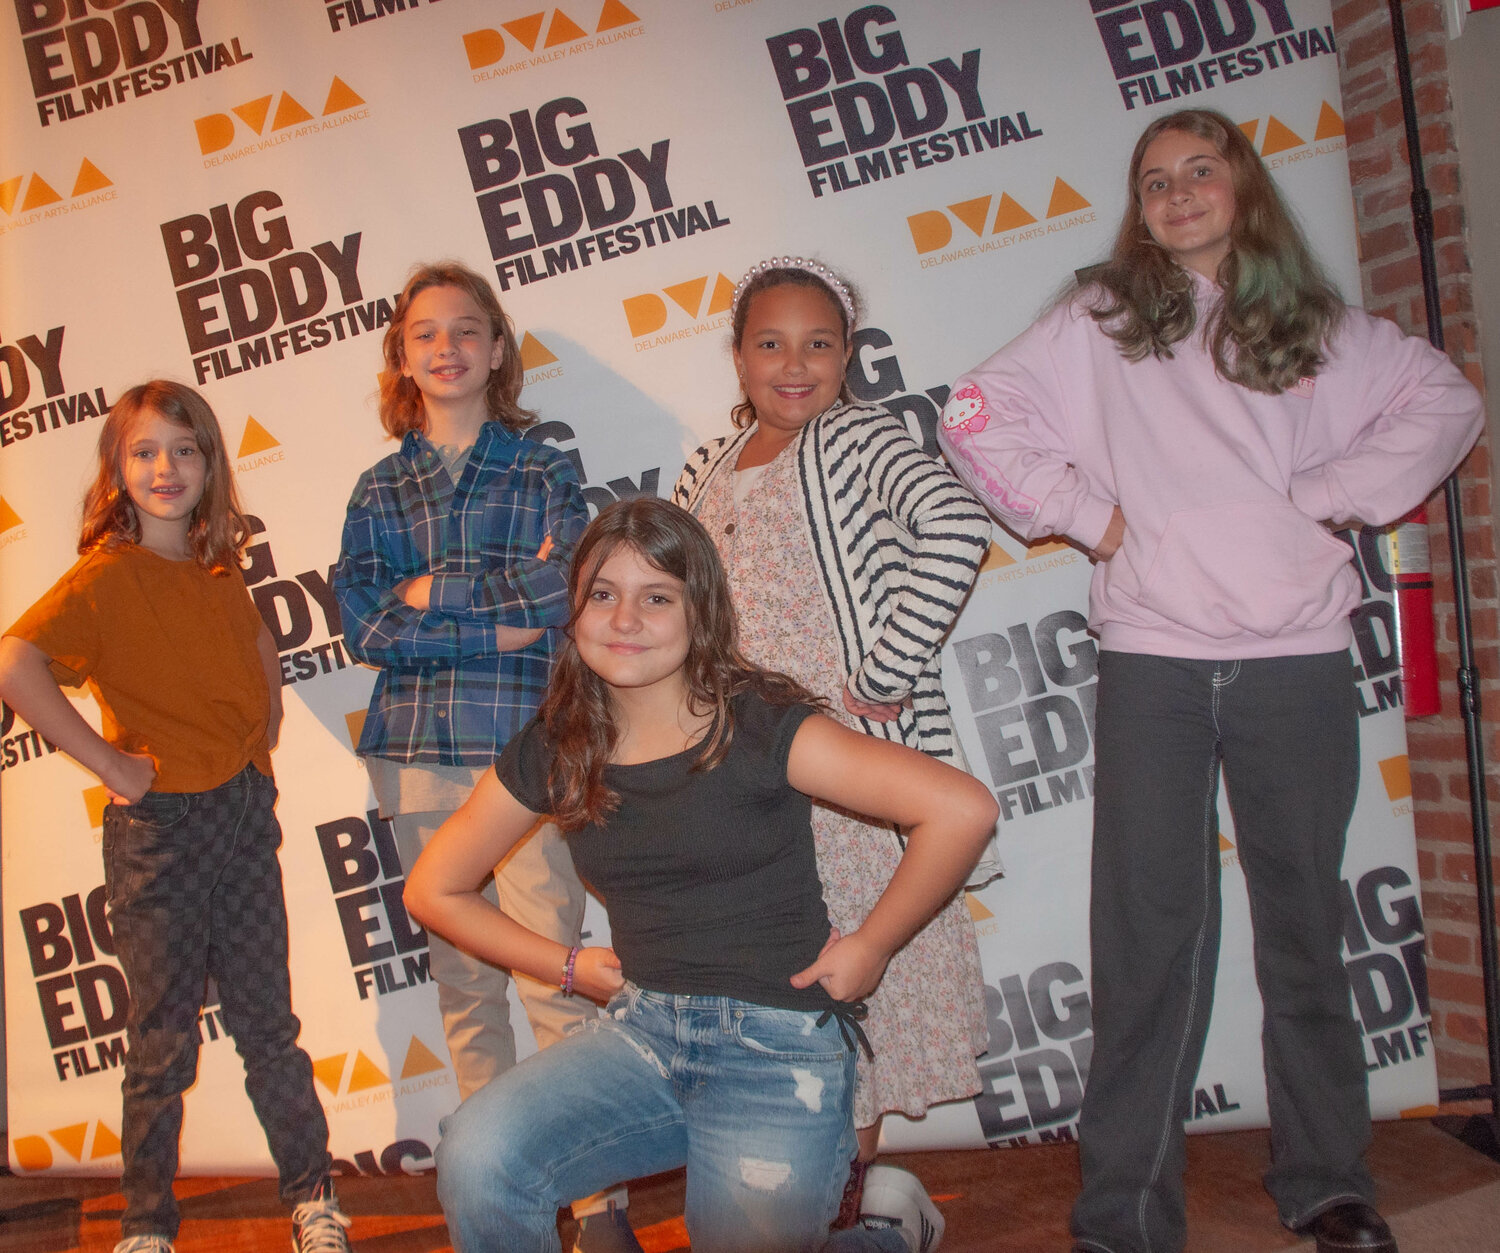 I could see the joy reflected in the faces of young filmmakers Alice, left; Emmett; Victoria; Emily; and Polly at last week's screening of shorts presented as part of the Big Eddy Film Festival.